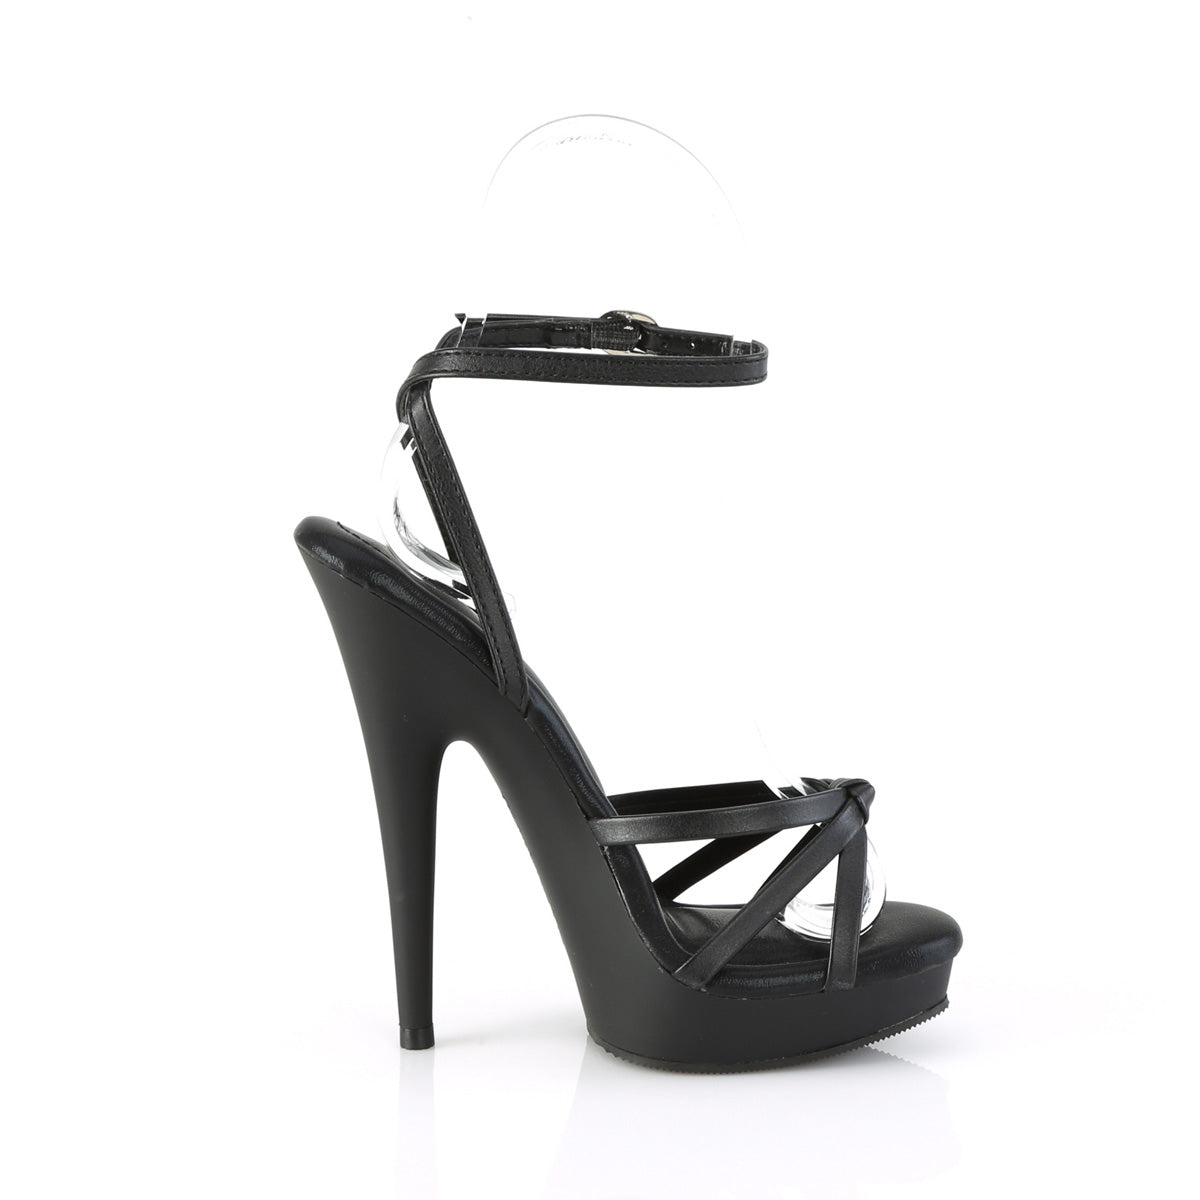 Pleaser Adore-708N Sandals | Buy Sexy Shoes at Shoefreaks.ca